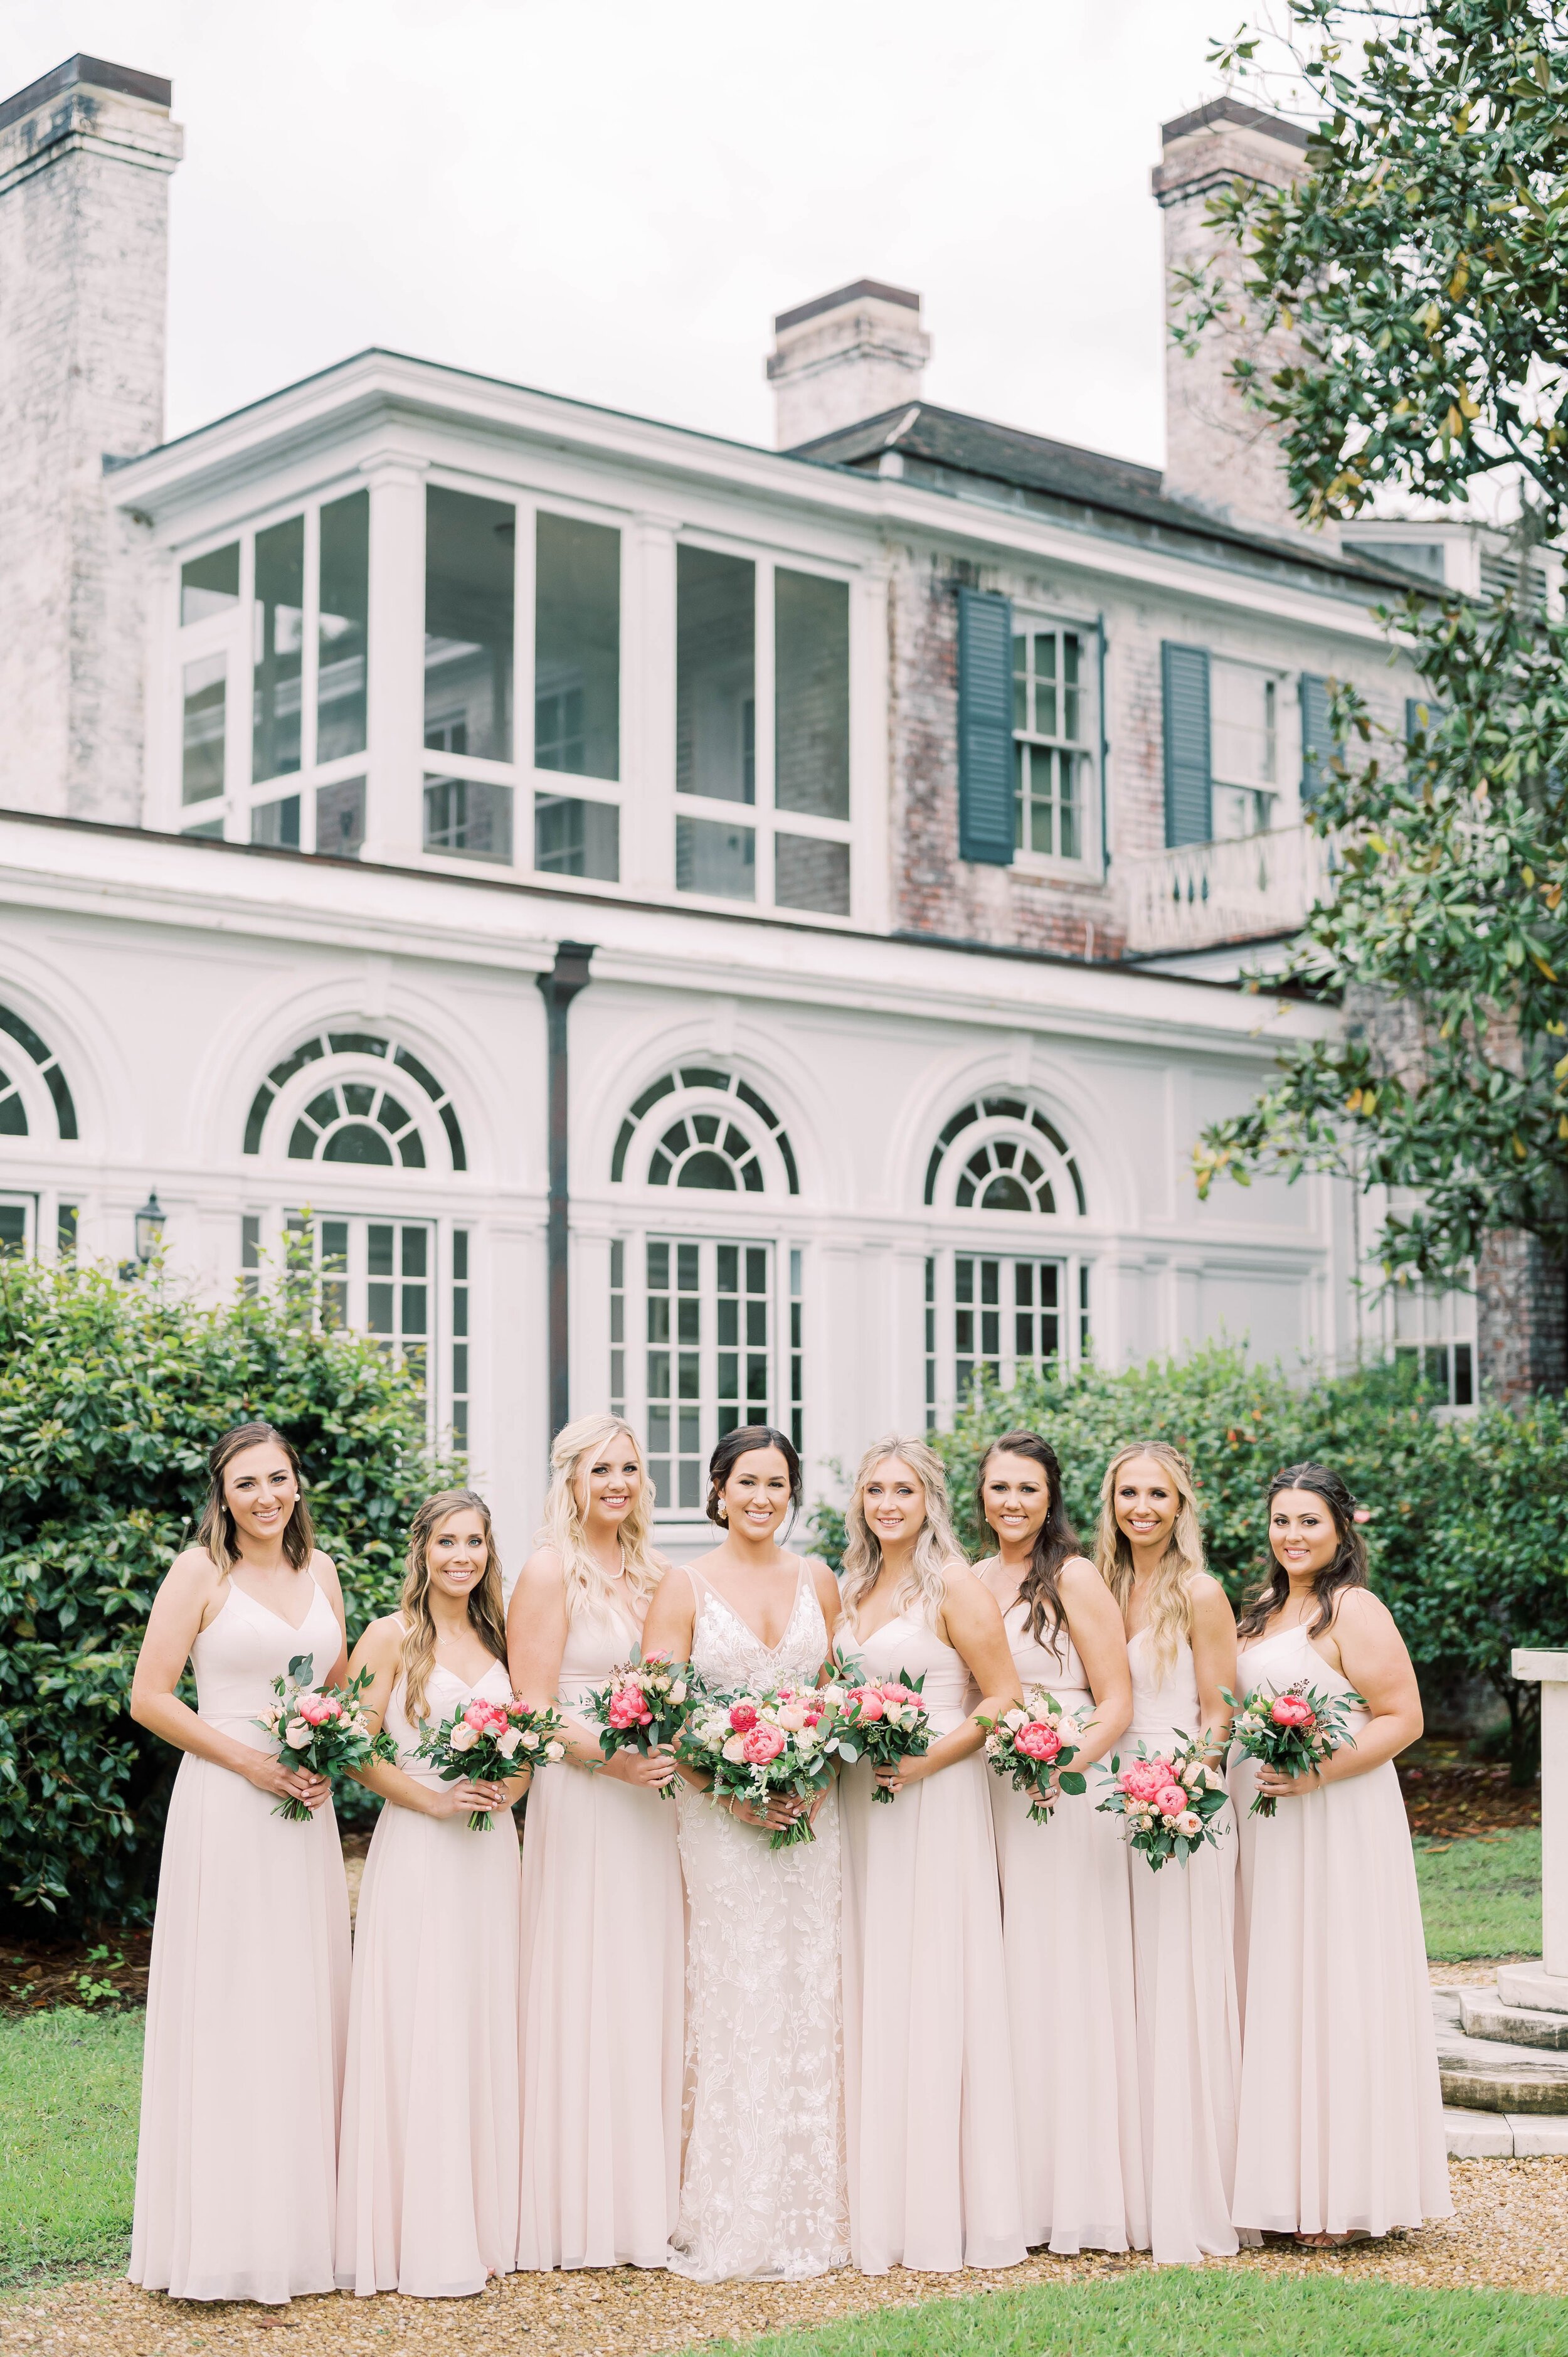 ivory-and-beau-blog-wedding-blog-ivory-and-beau-bride-madison-down-for-the-gown-made-with-love-wedding-dress-bridal-gown-wedding-gown-real-bride-real-wedding-bridal-shop-savannah-georgia-21Madison.Blake-442.jpg